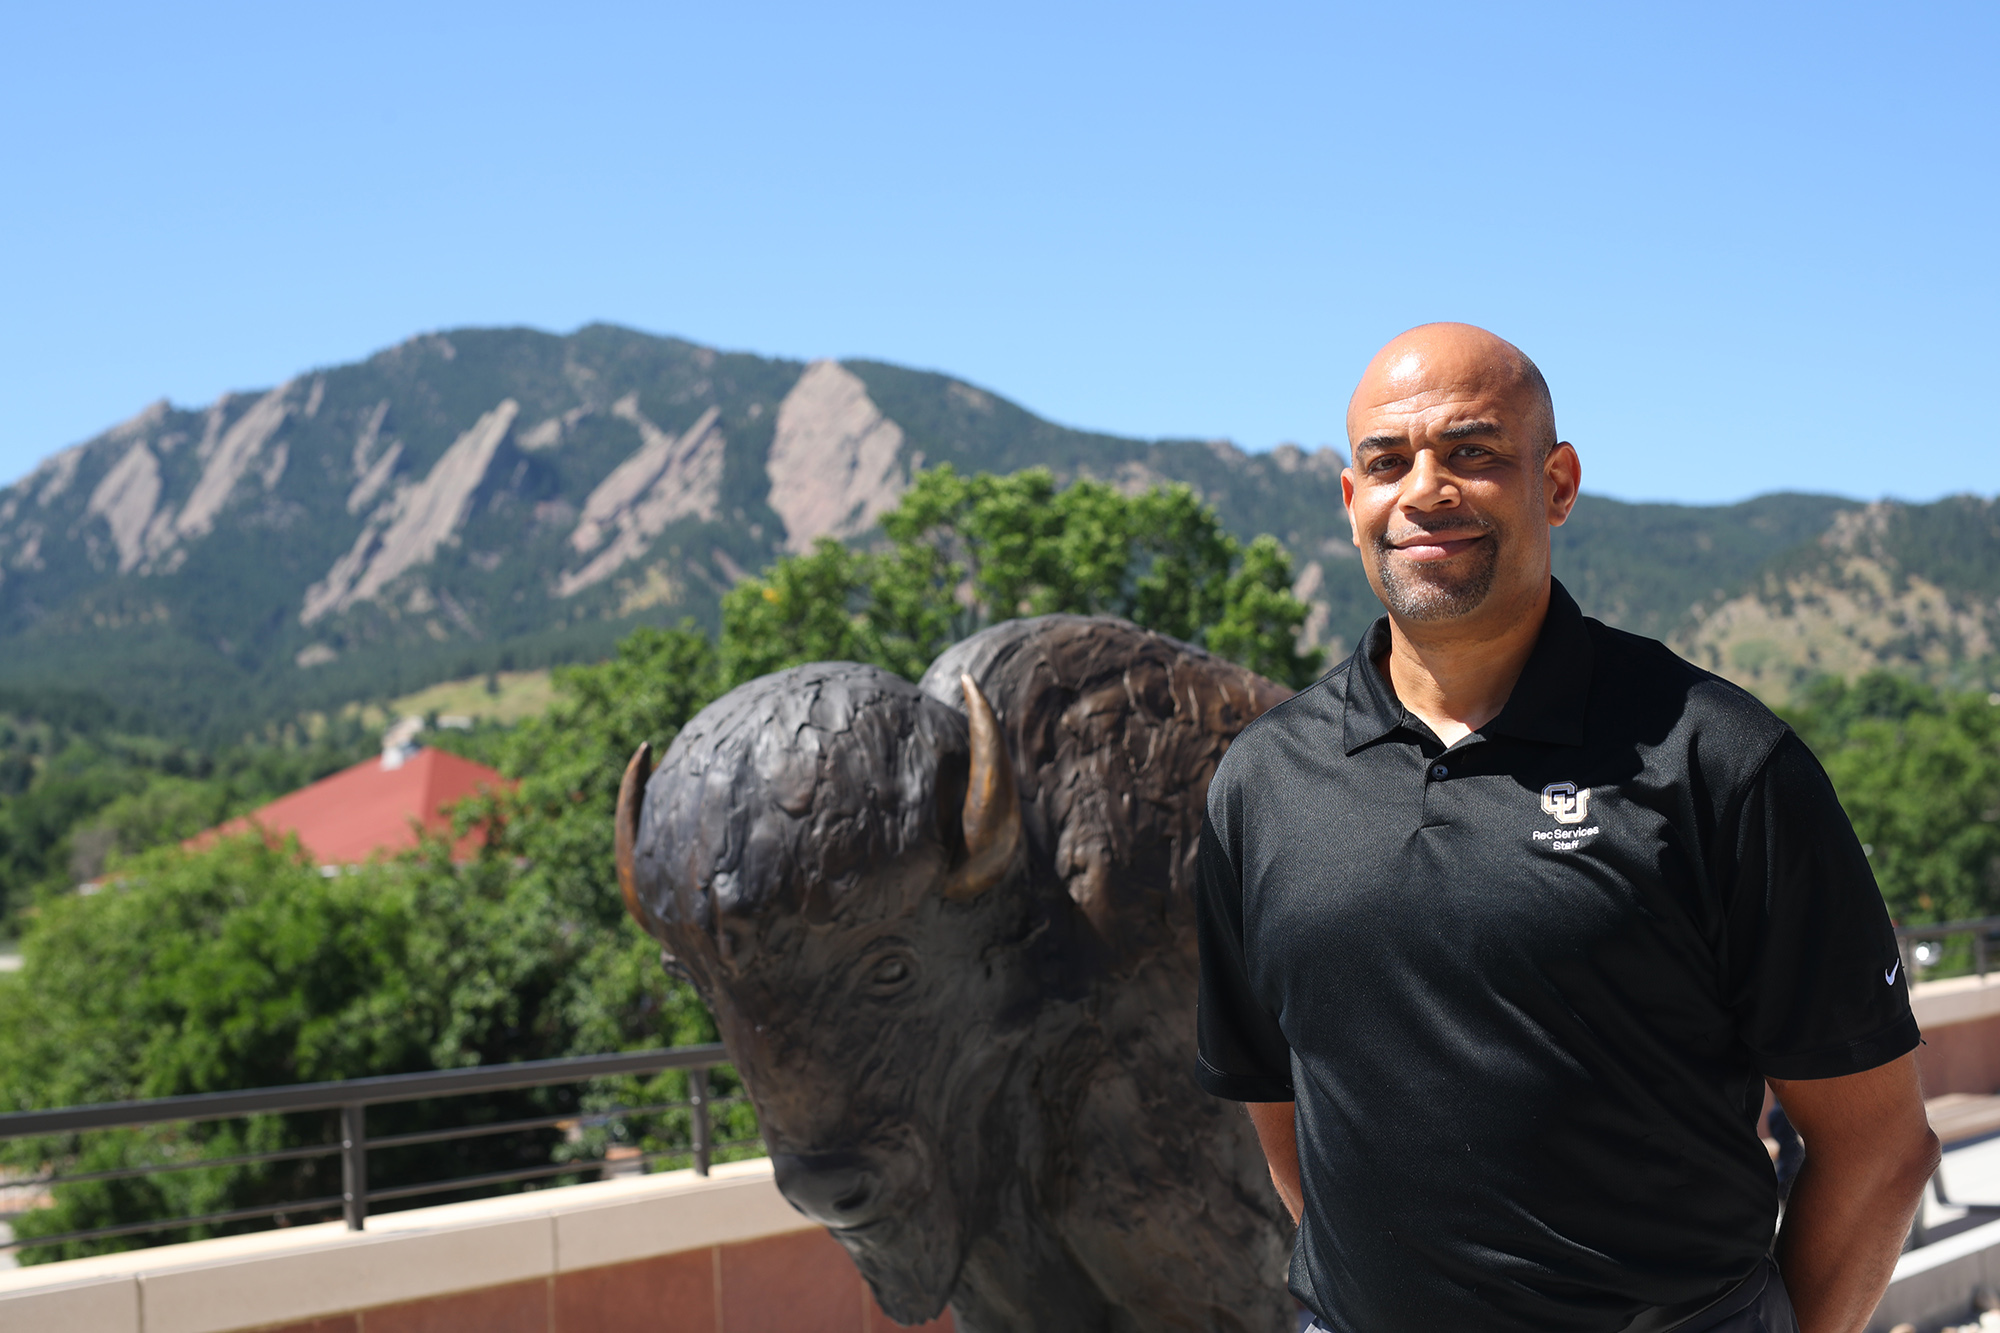 university of iowa alumnus tony price standing on the university of colorado boulder campus with the mountains in the background